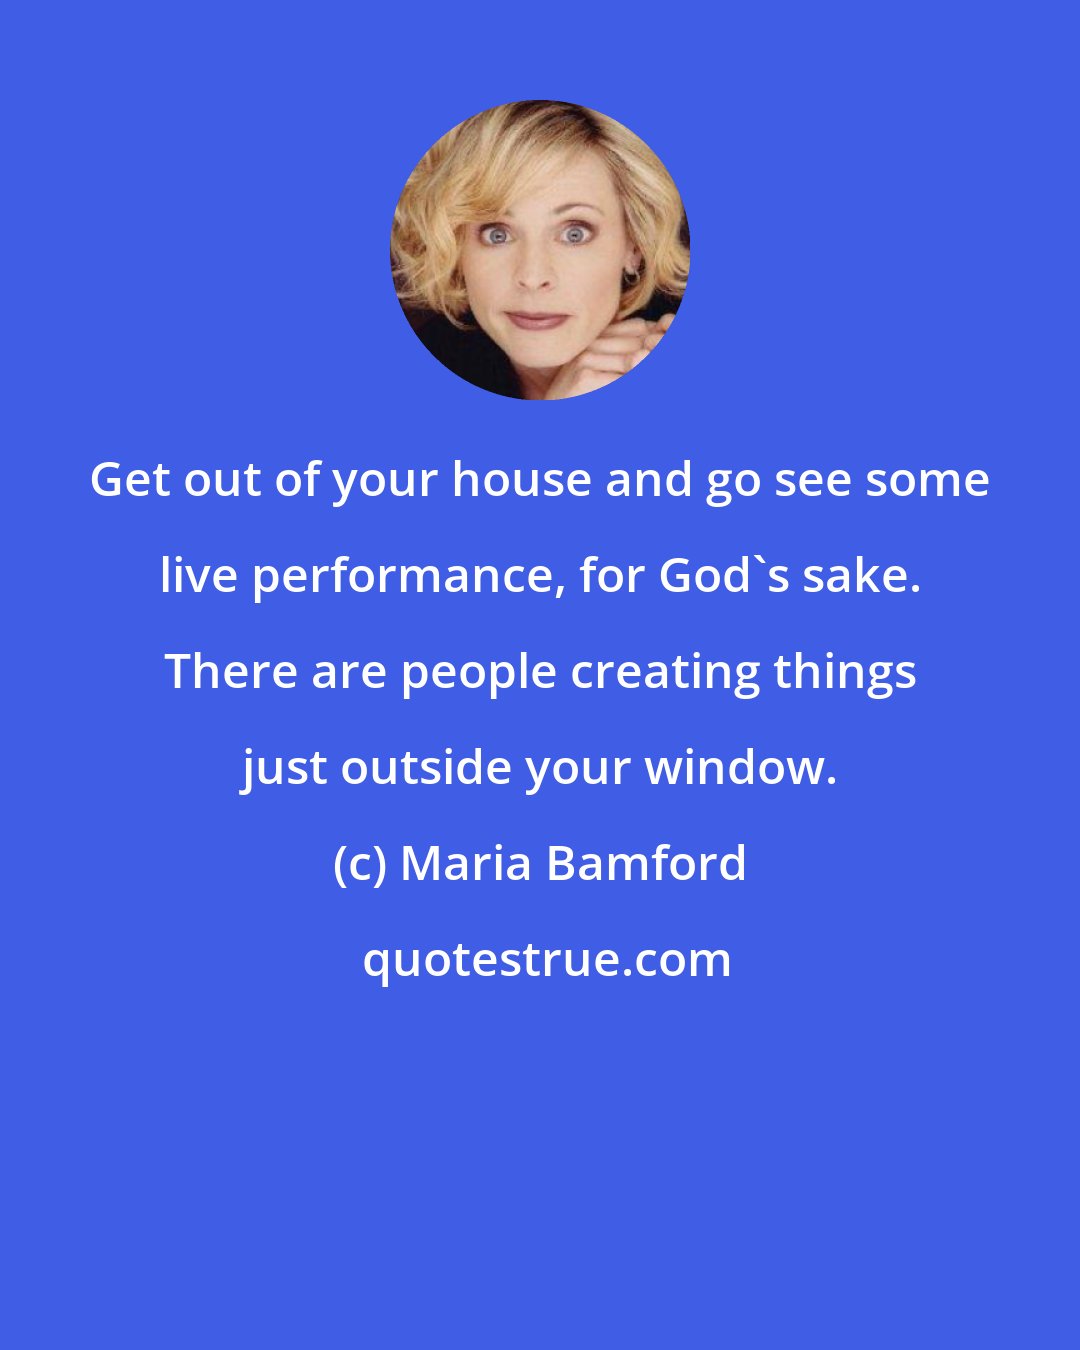 Maria Bamford: Get out of your house and go see some live performance, for God's sake. There are people creating things just outside your window.